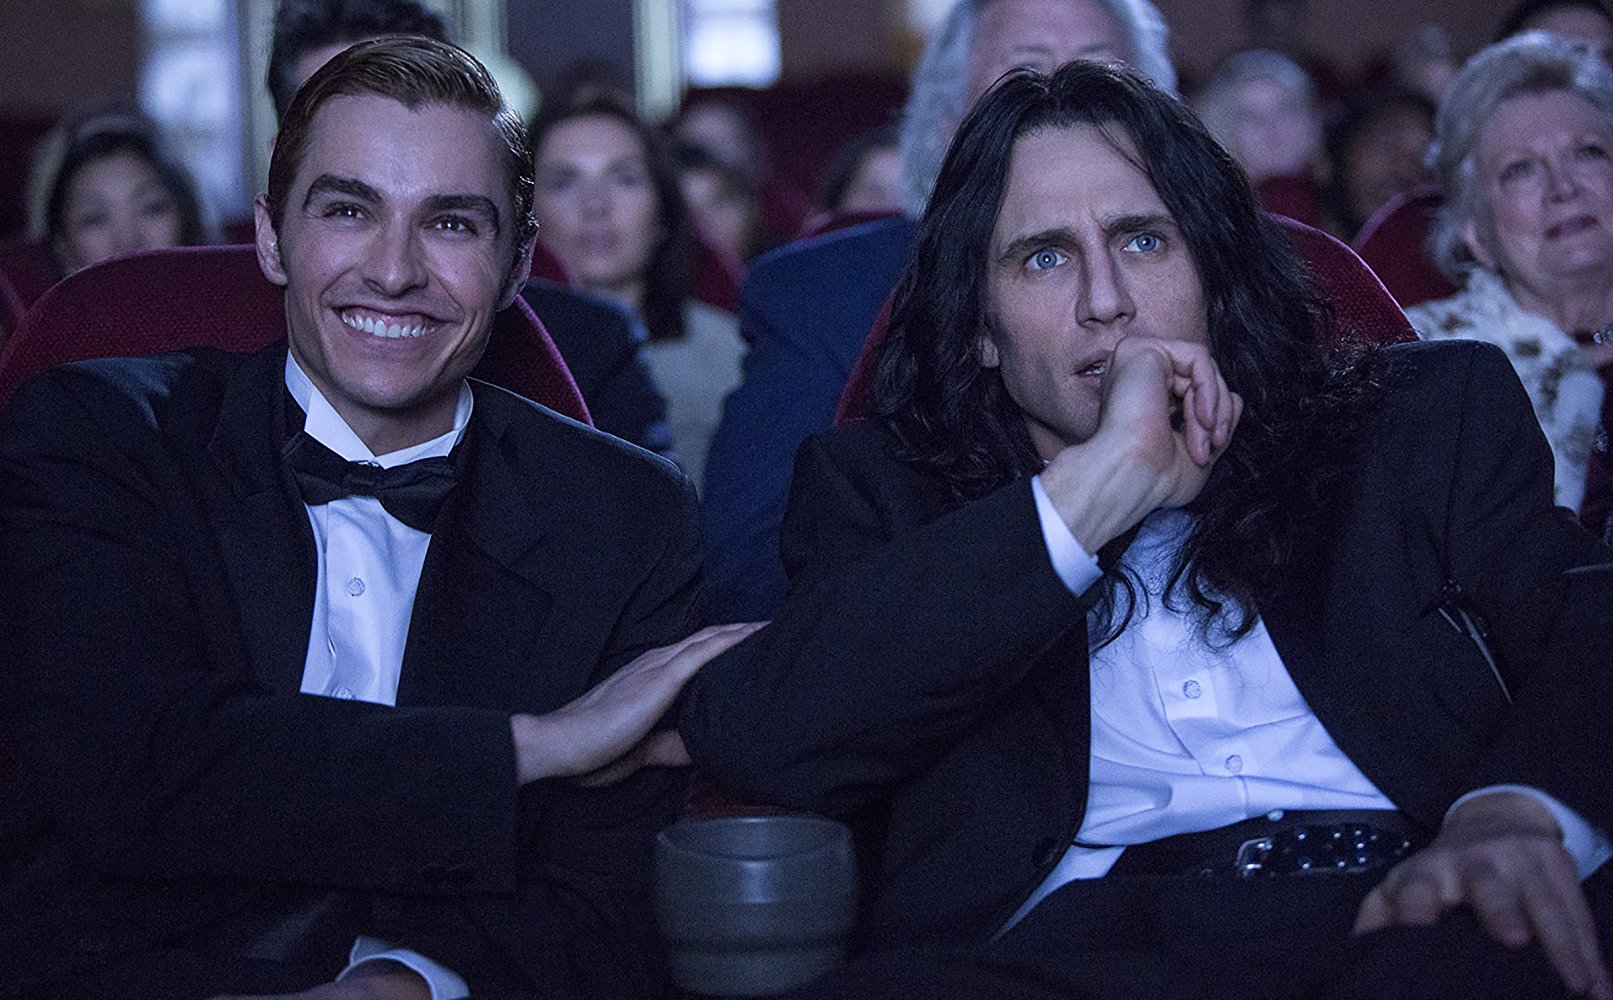 THE DISASTER ARTIST Boasts a Transformative Performance